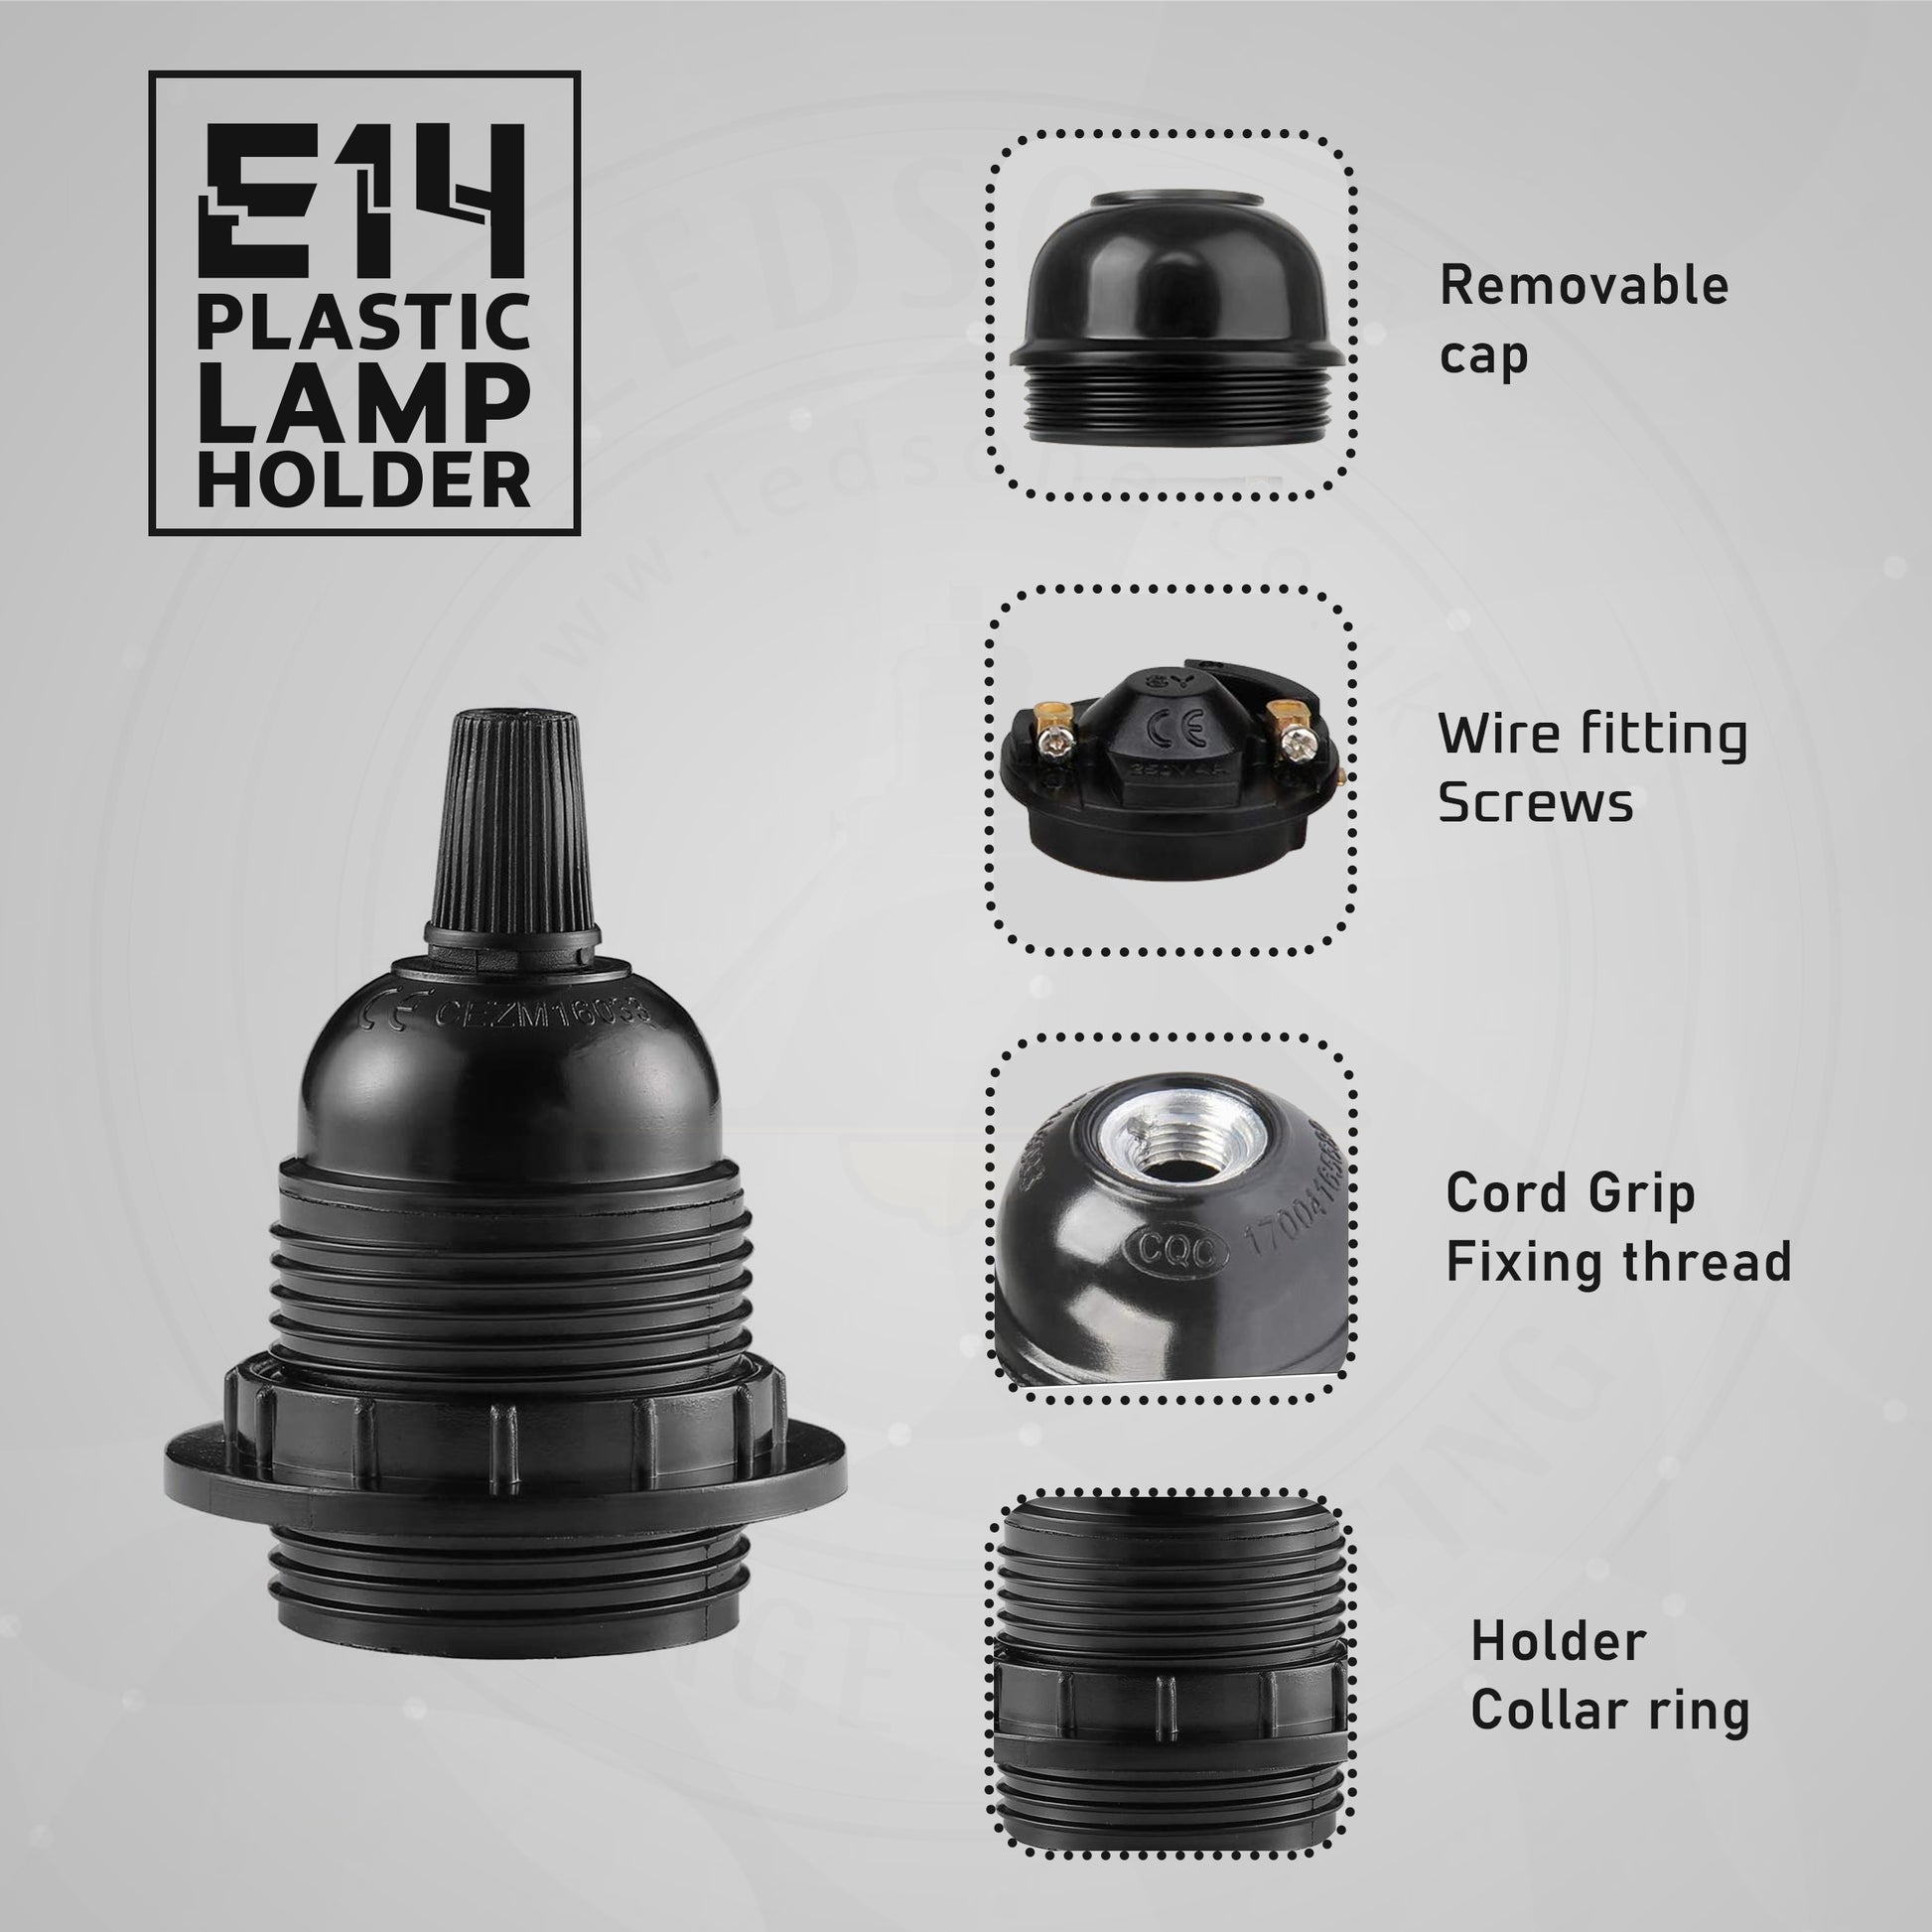 Black Bakelight with thread and without ring Lamp holder~3652